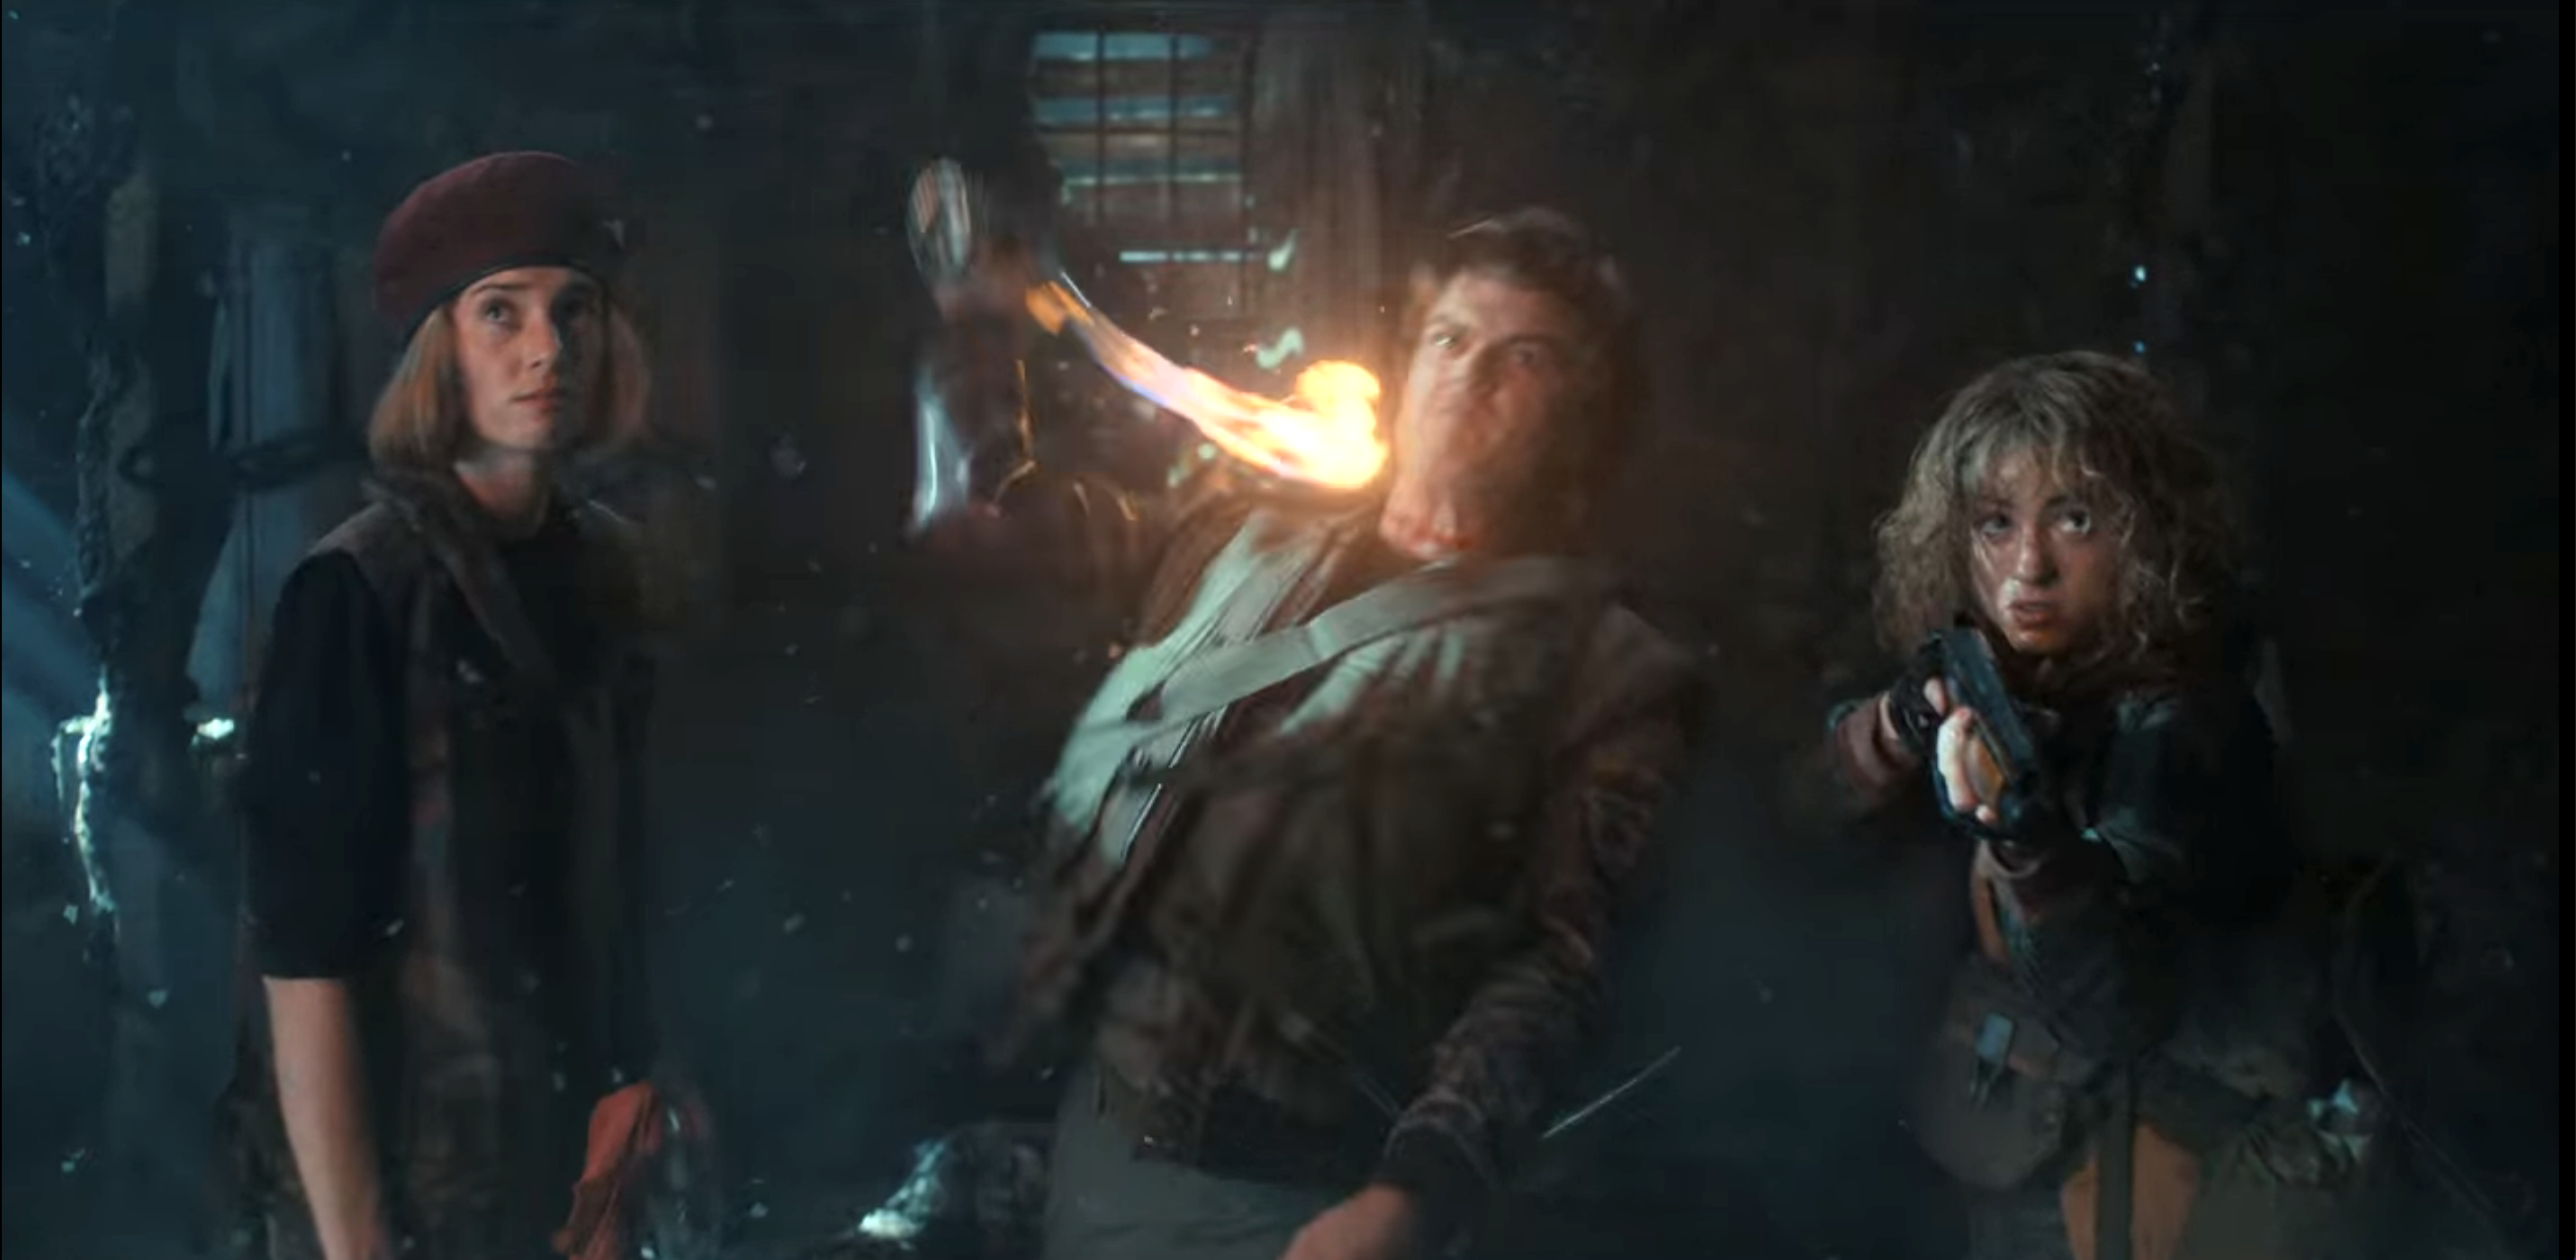 Steve throwing a Molotov cocktail